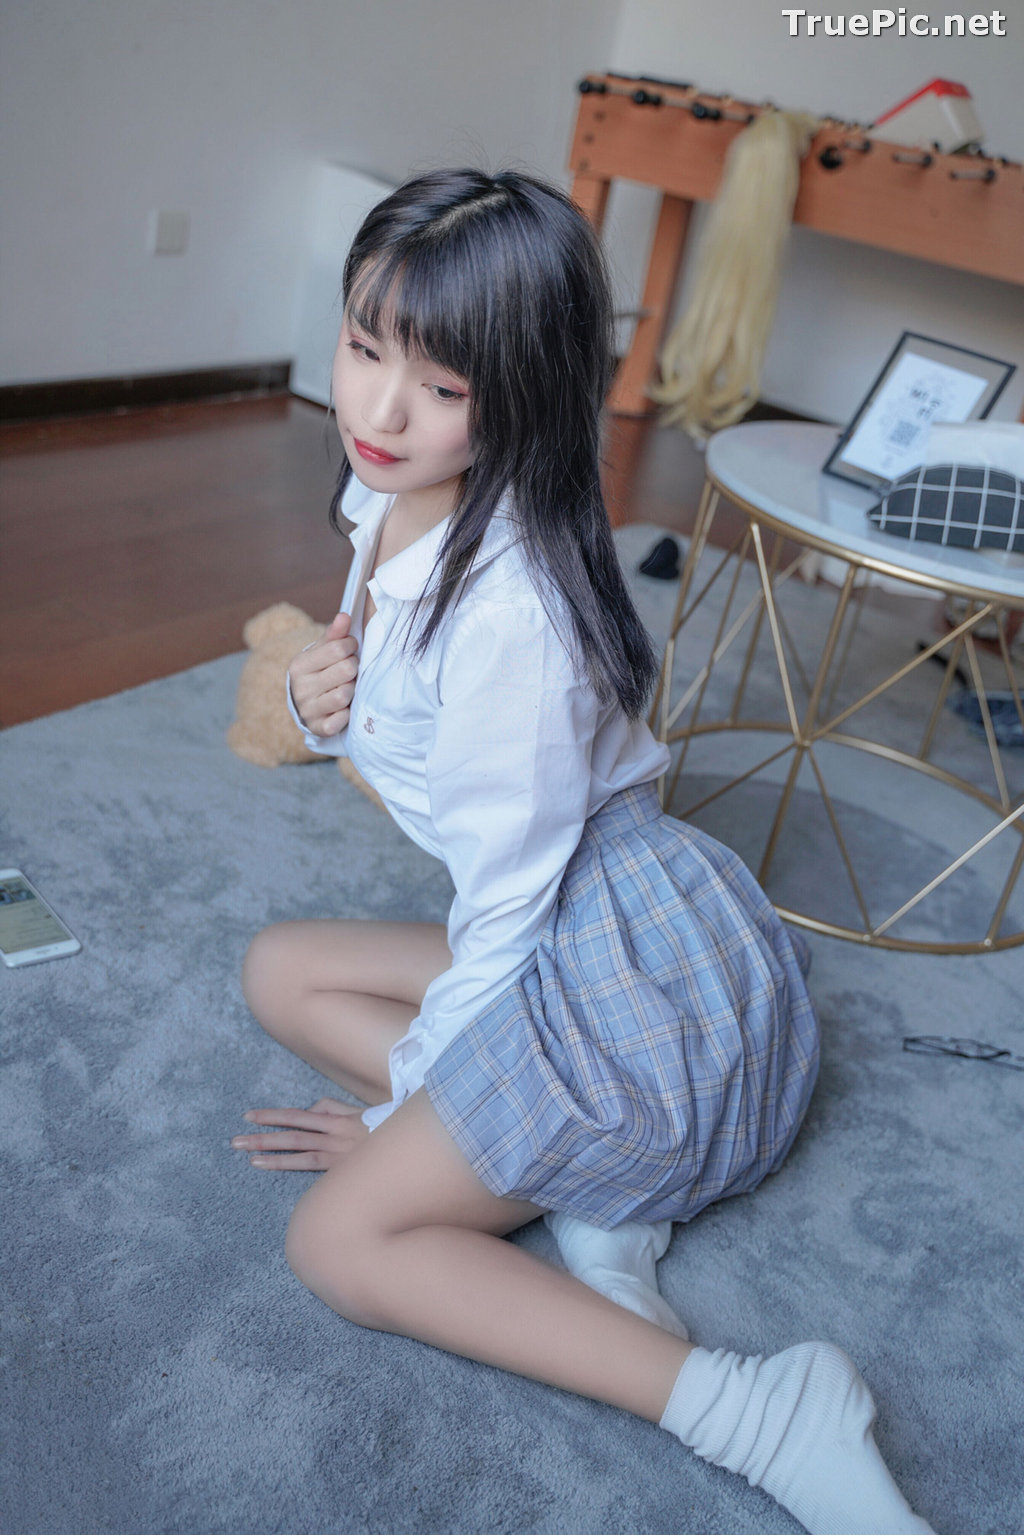 Image [MTCos] 喵糖映画 Vol.047 – Chinese Cute Model – Sexy Student Uniform - TruePic.net - Picture-32